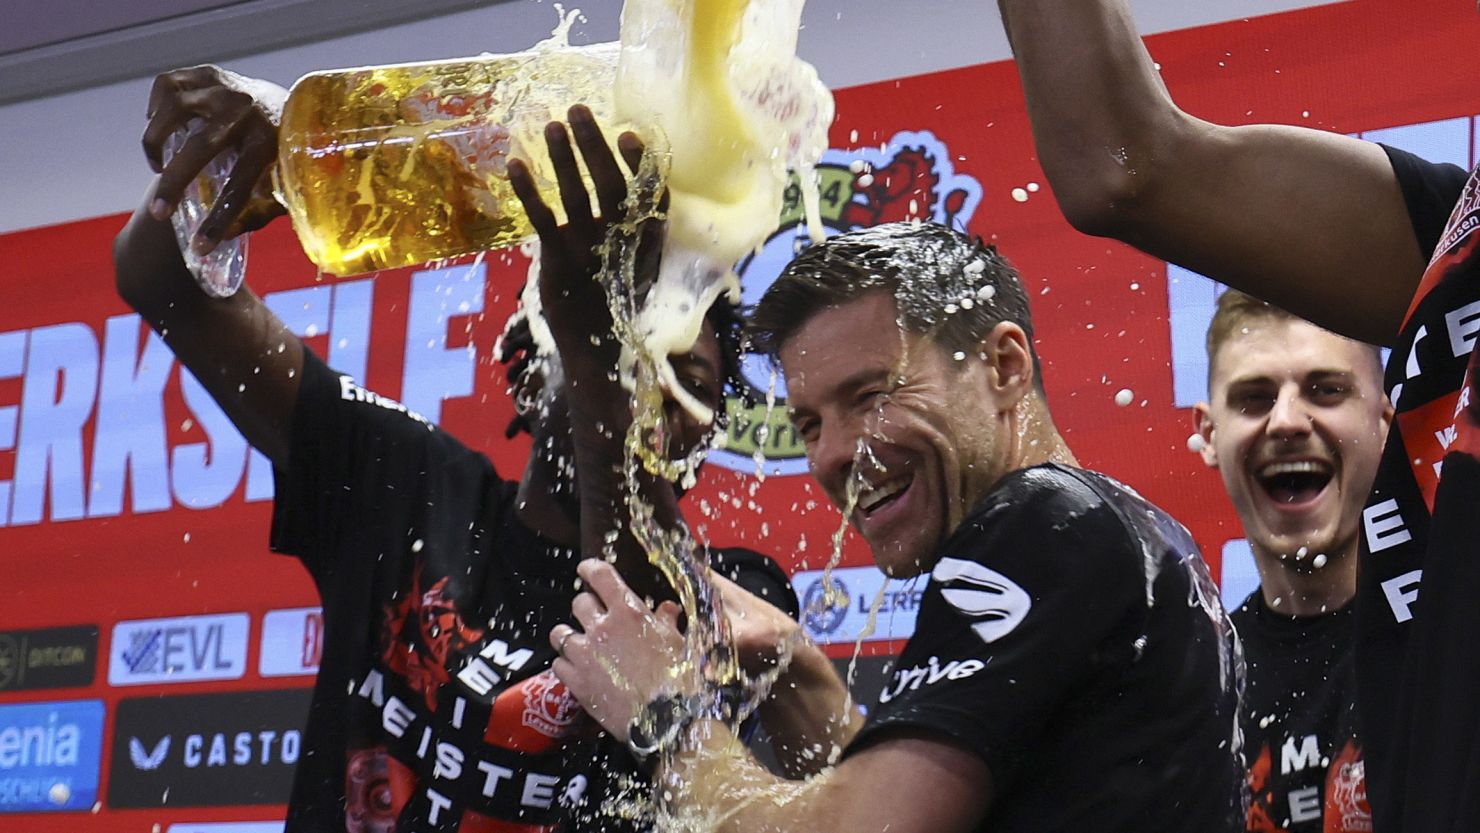 Bayer Leverkusen players pour beer on coach Xabi Alonso during a press conference after winning the Bundesliga title.